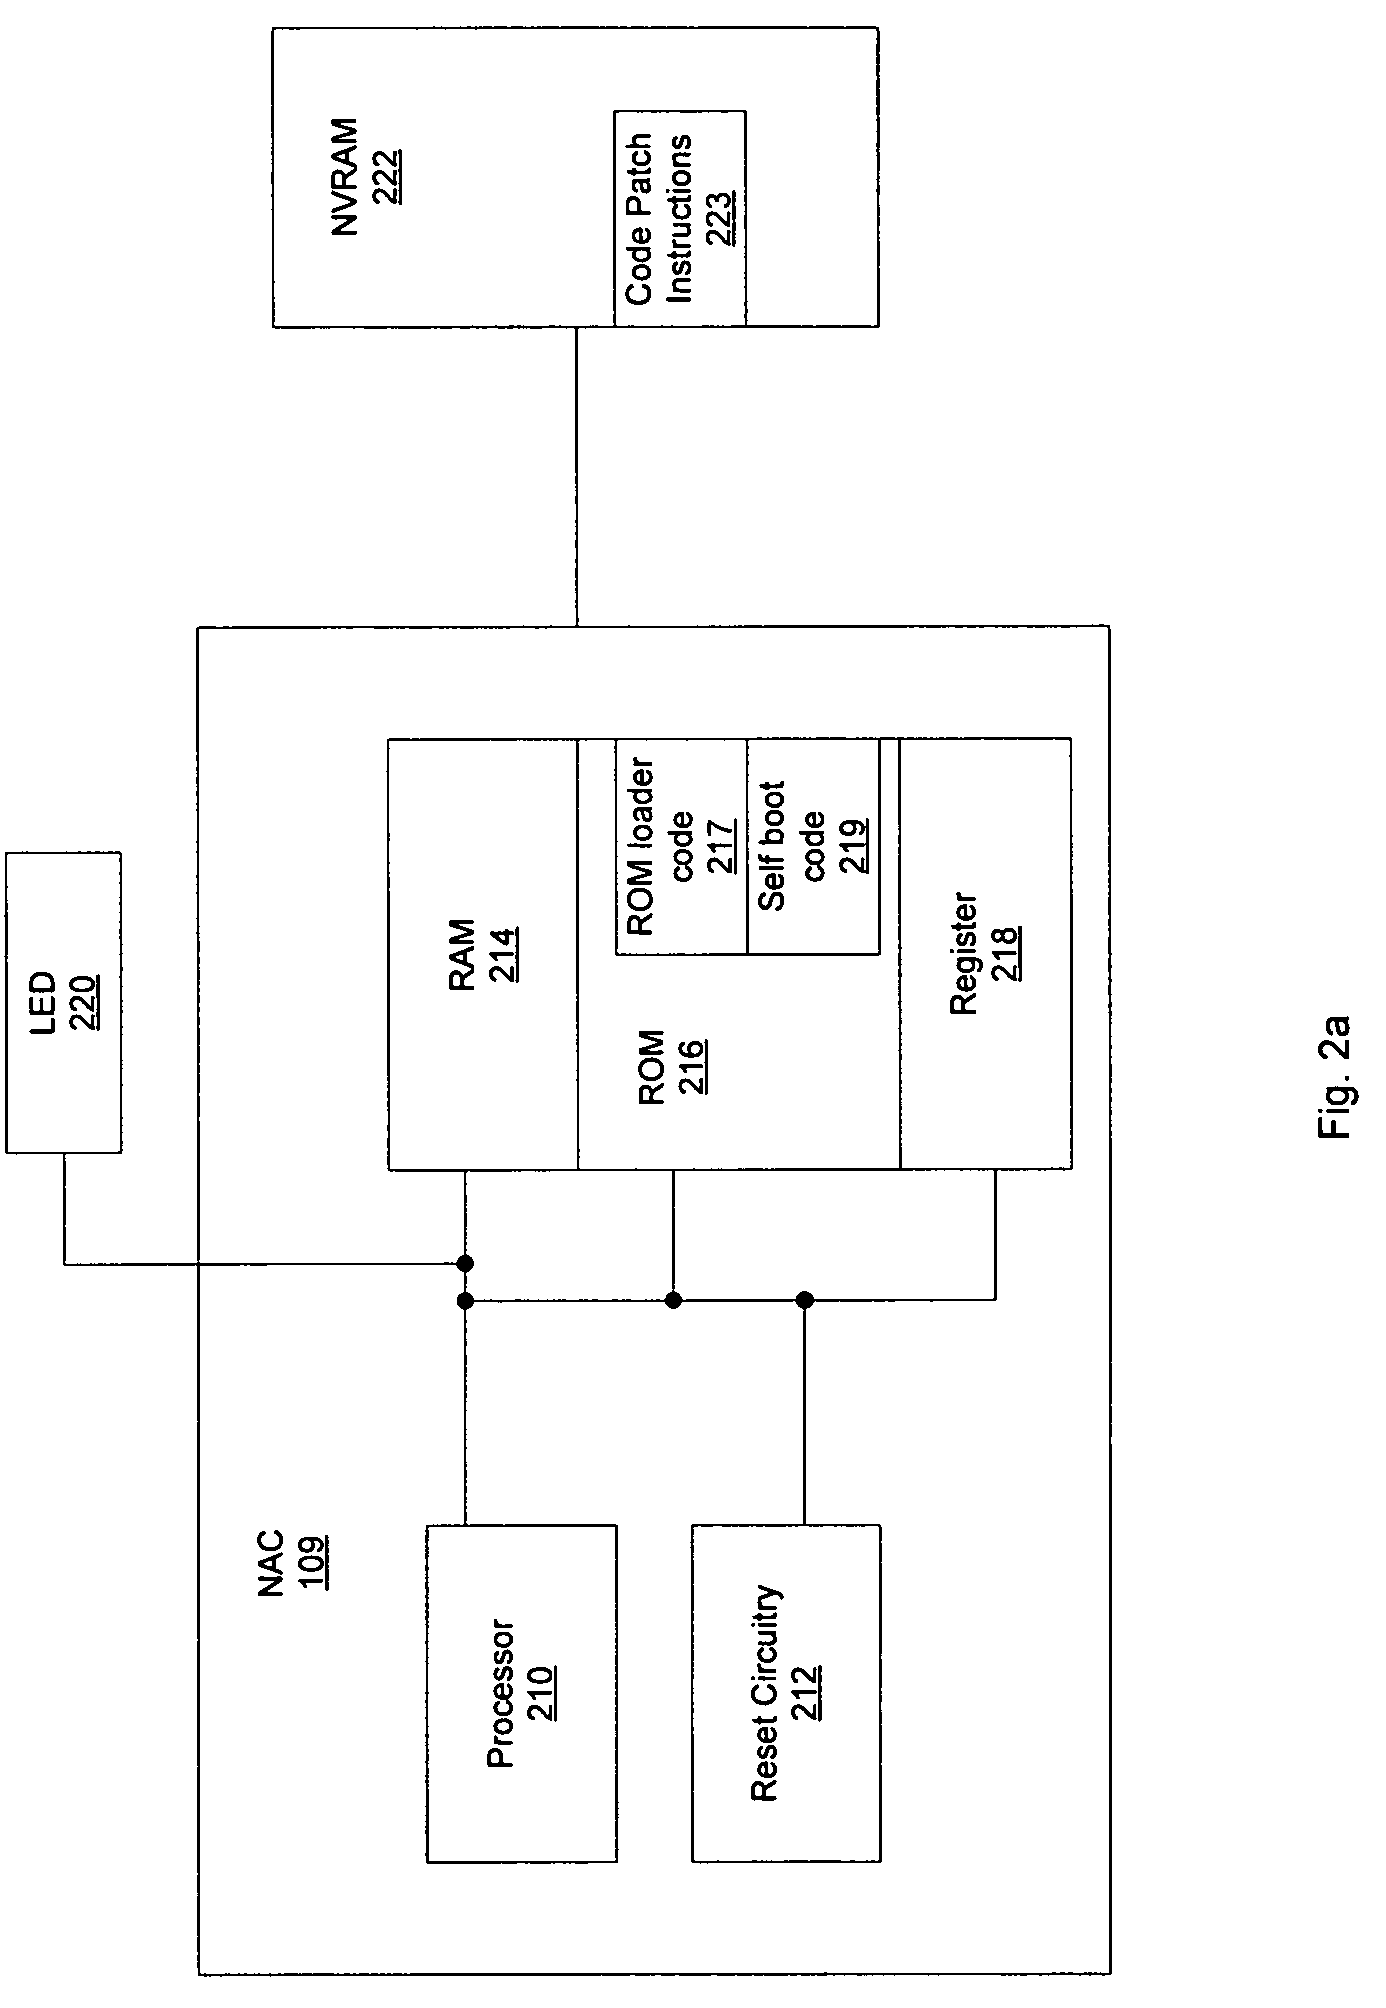 Method and system for modifying operation of ROM based boot code of a network adapter chip